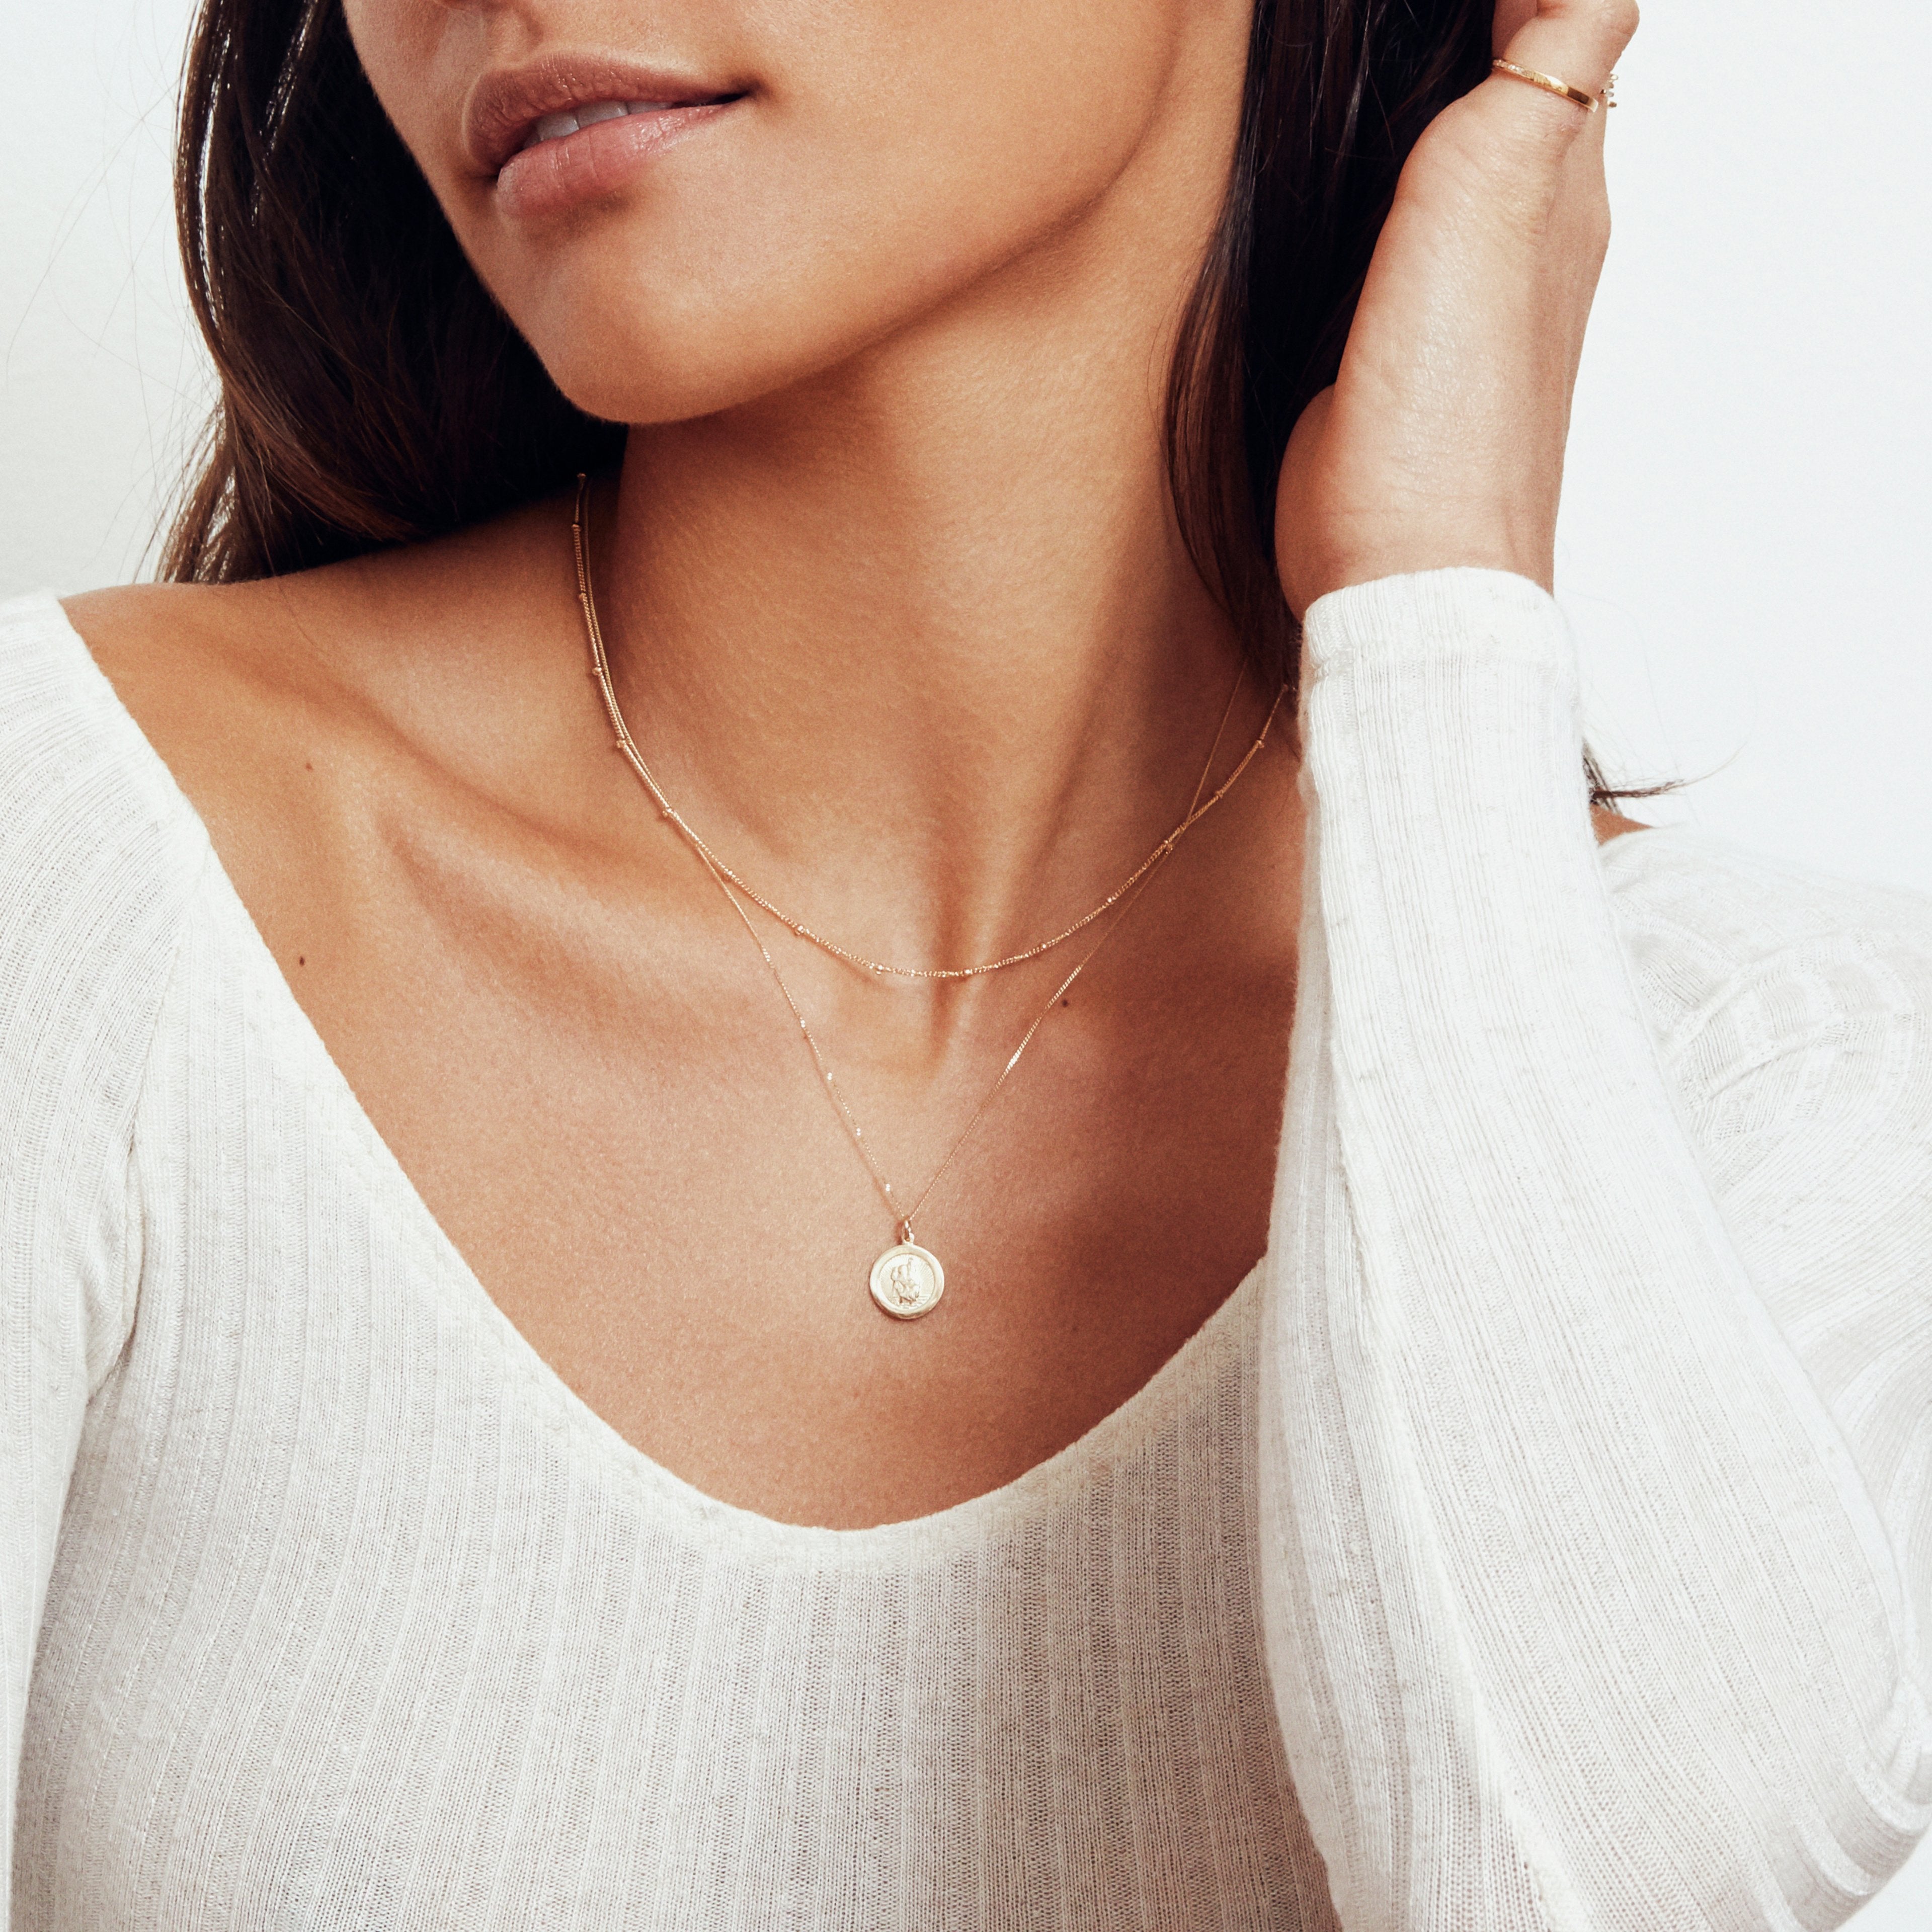 Brunette woman wearing a gold satellite chain necklace layered with with a circular gold pendant necklace around her neck